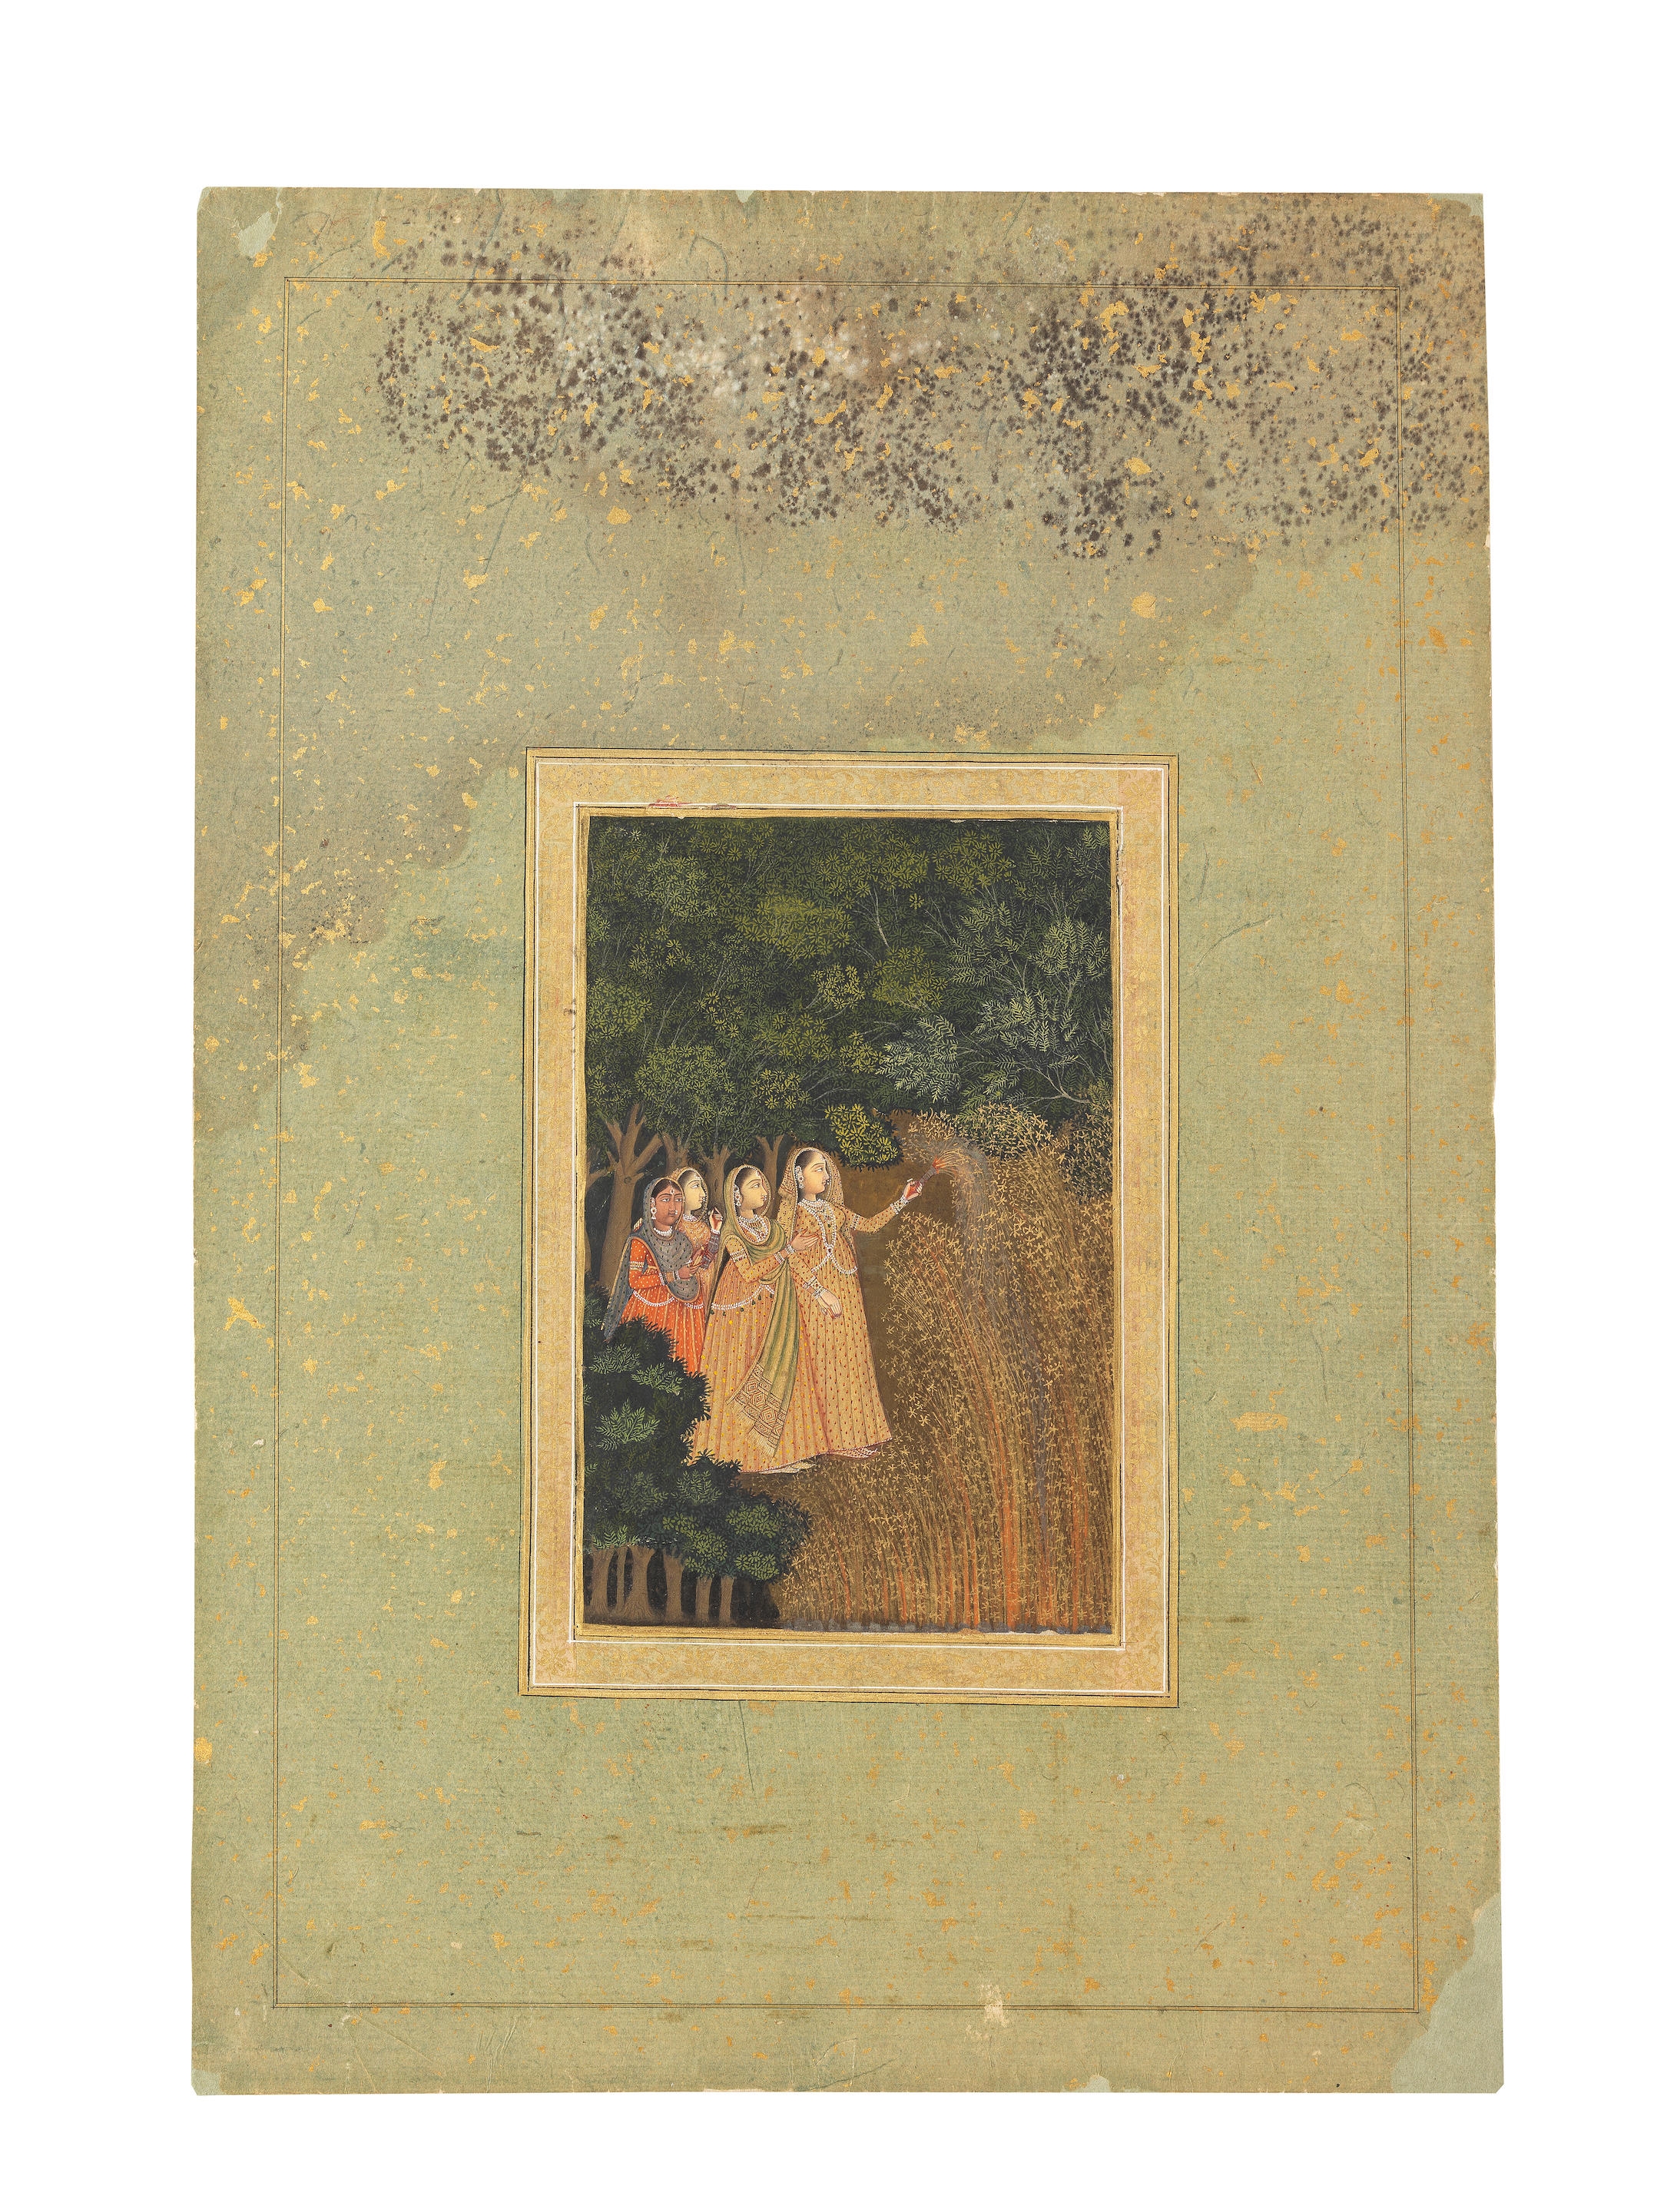 Maidens with fireworks in a forest grove, probably during the festival of Shab-barat by Mughal School, 18th Century, 17th-18th Century